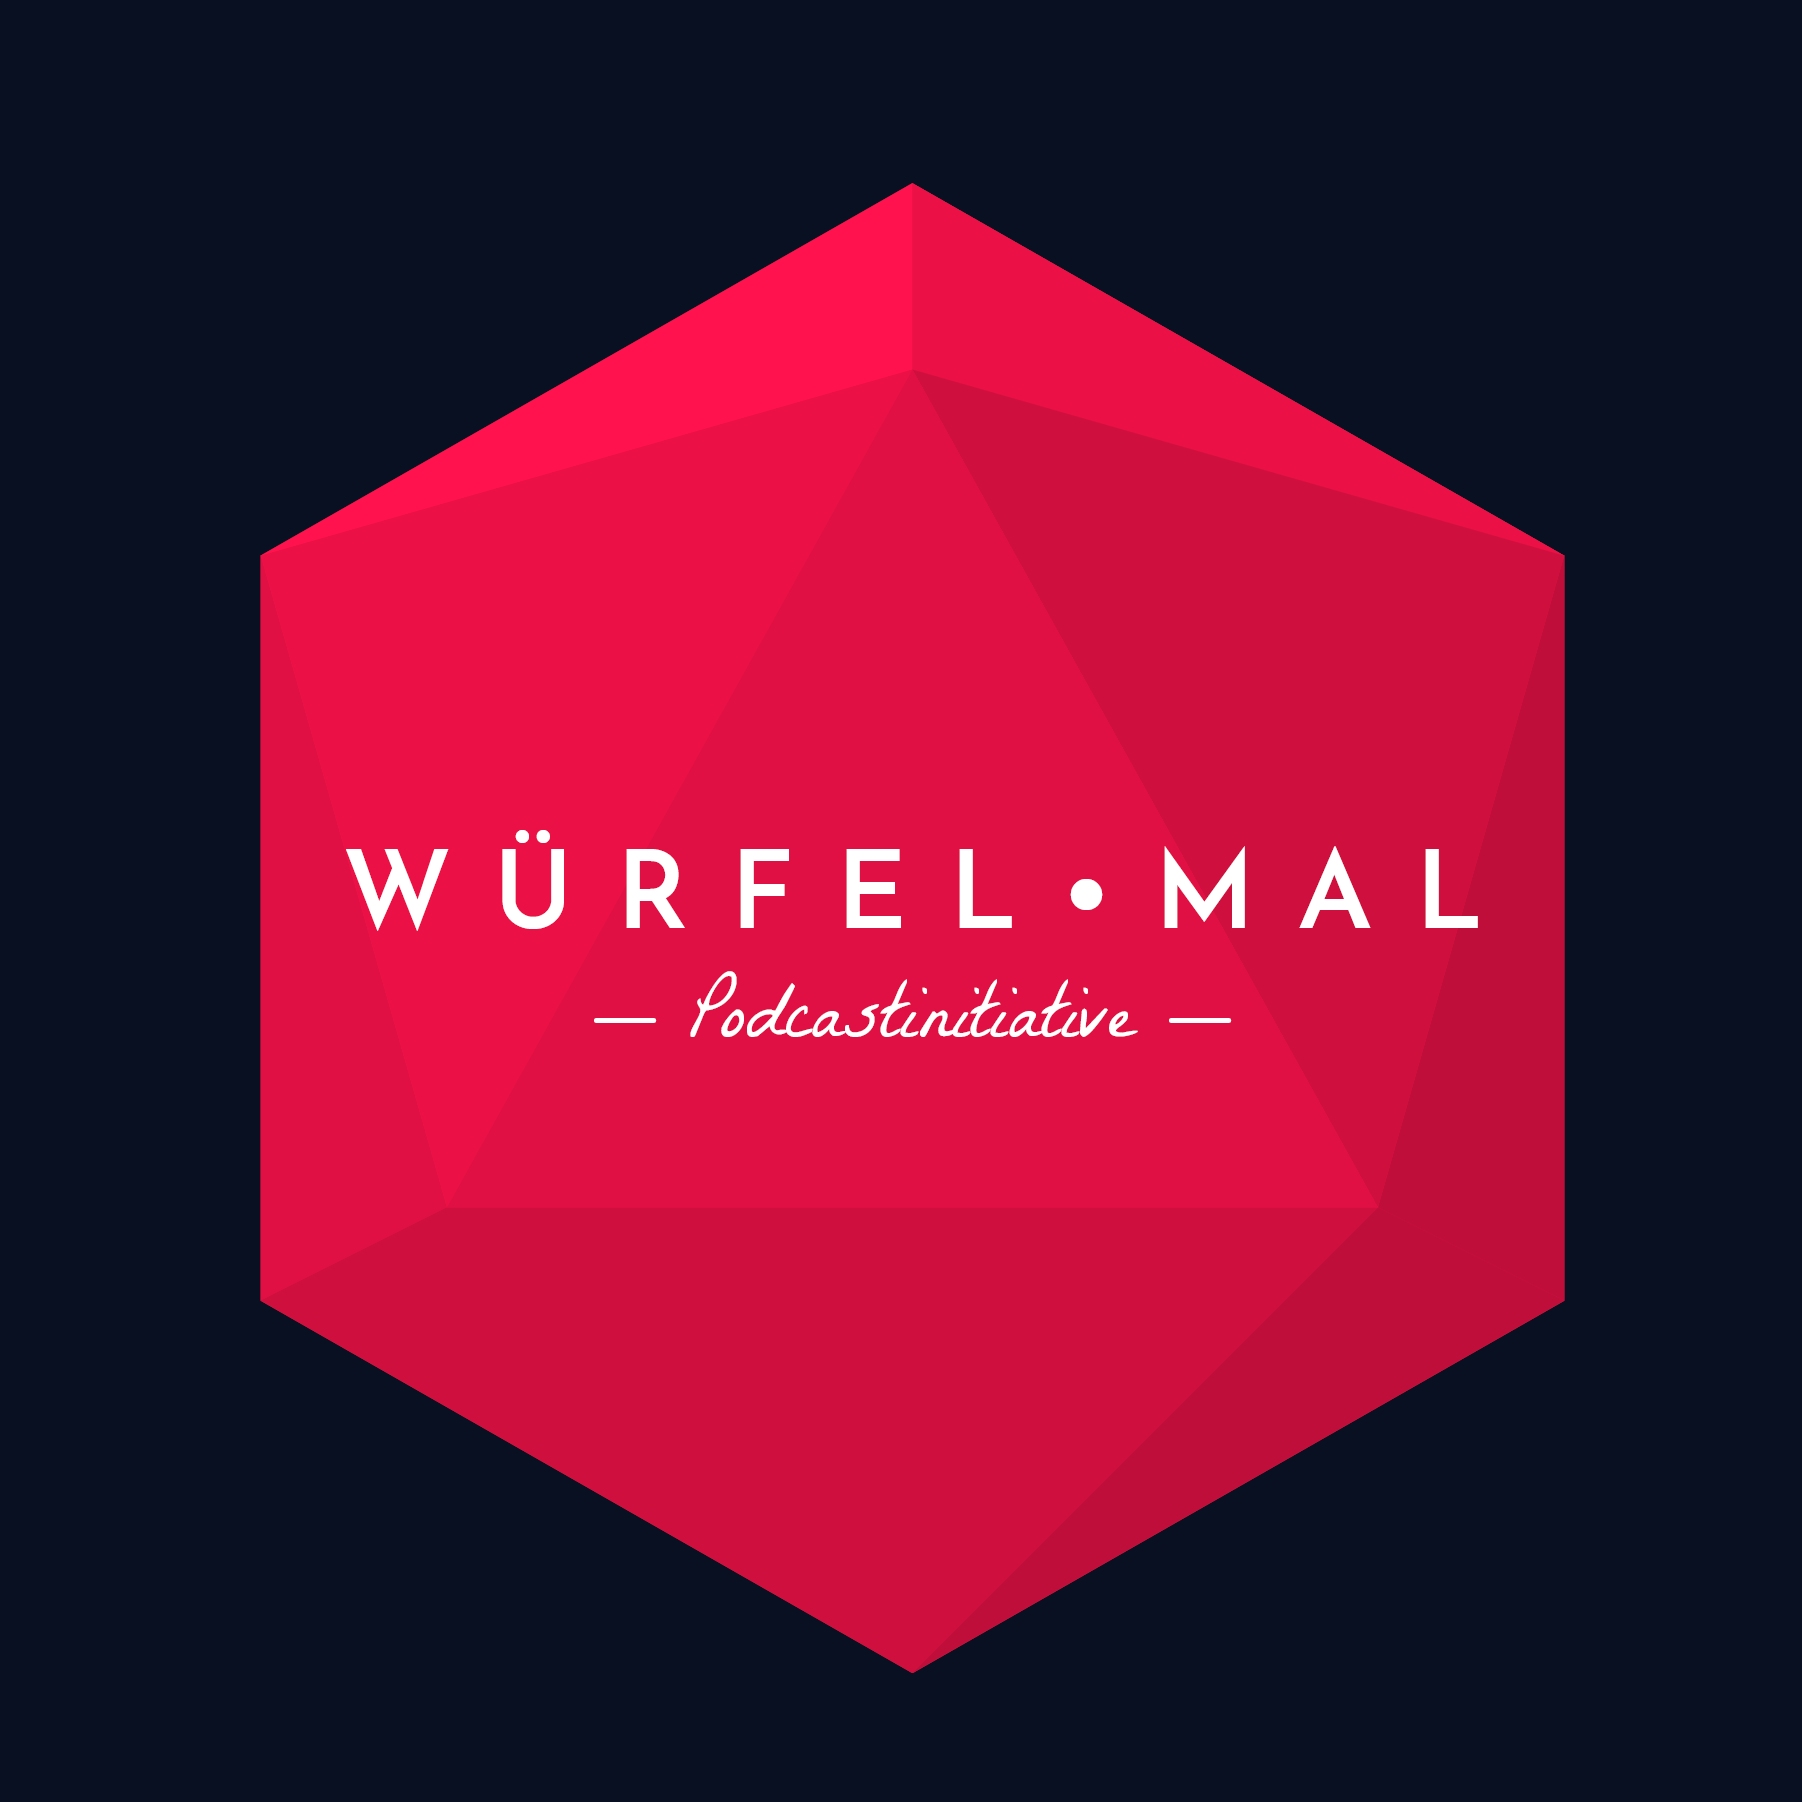 Logodesign Pen and Paper Podcast Würfel Mal